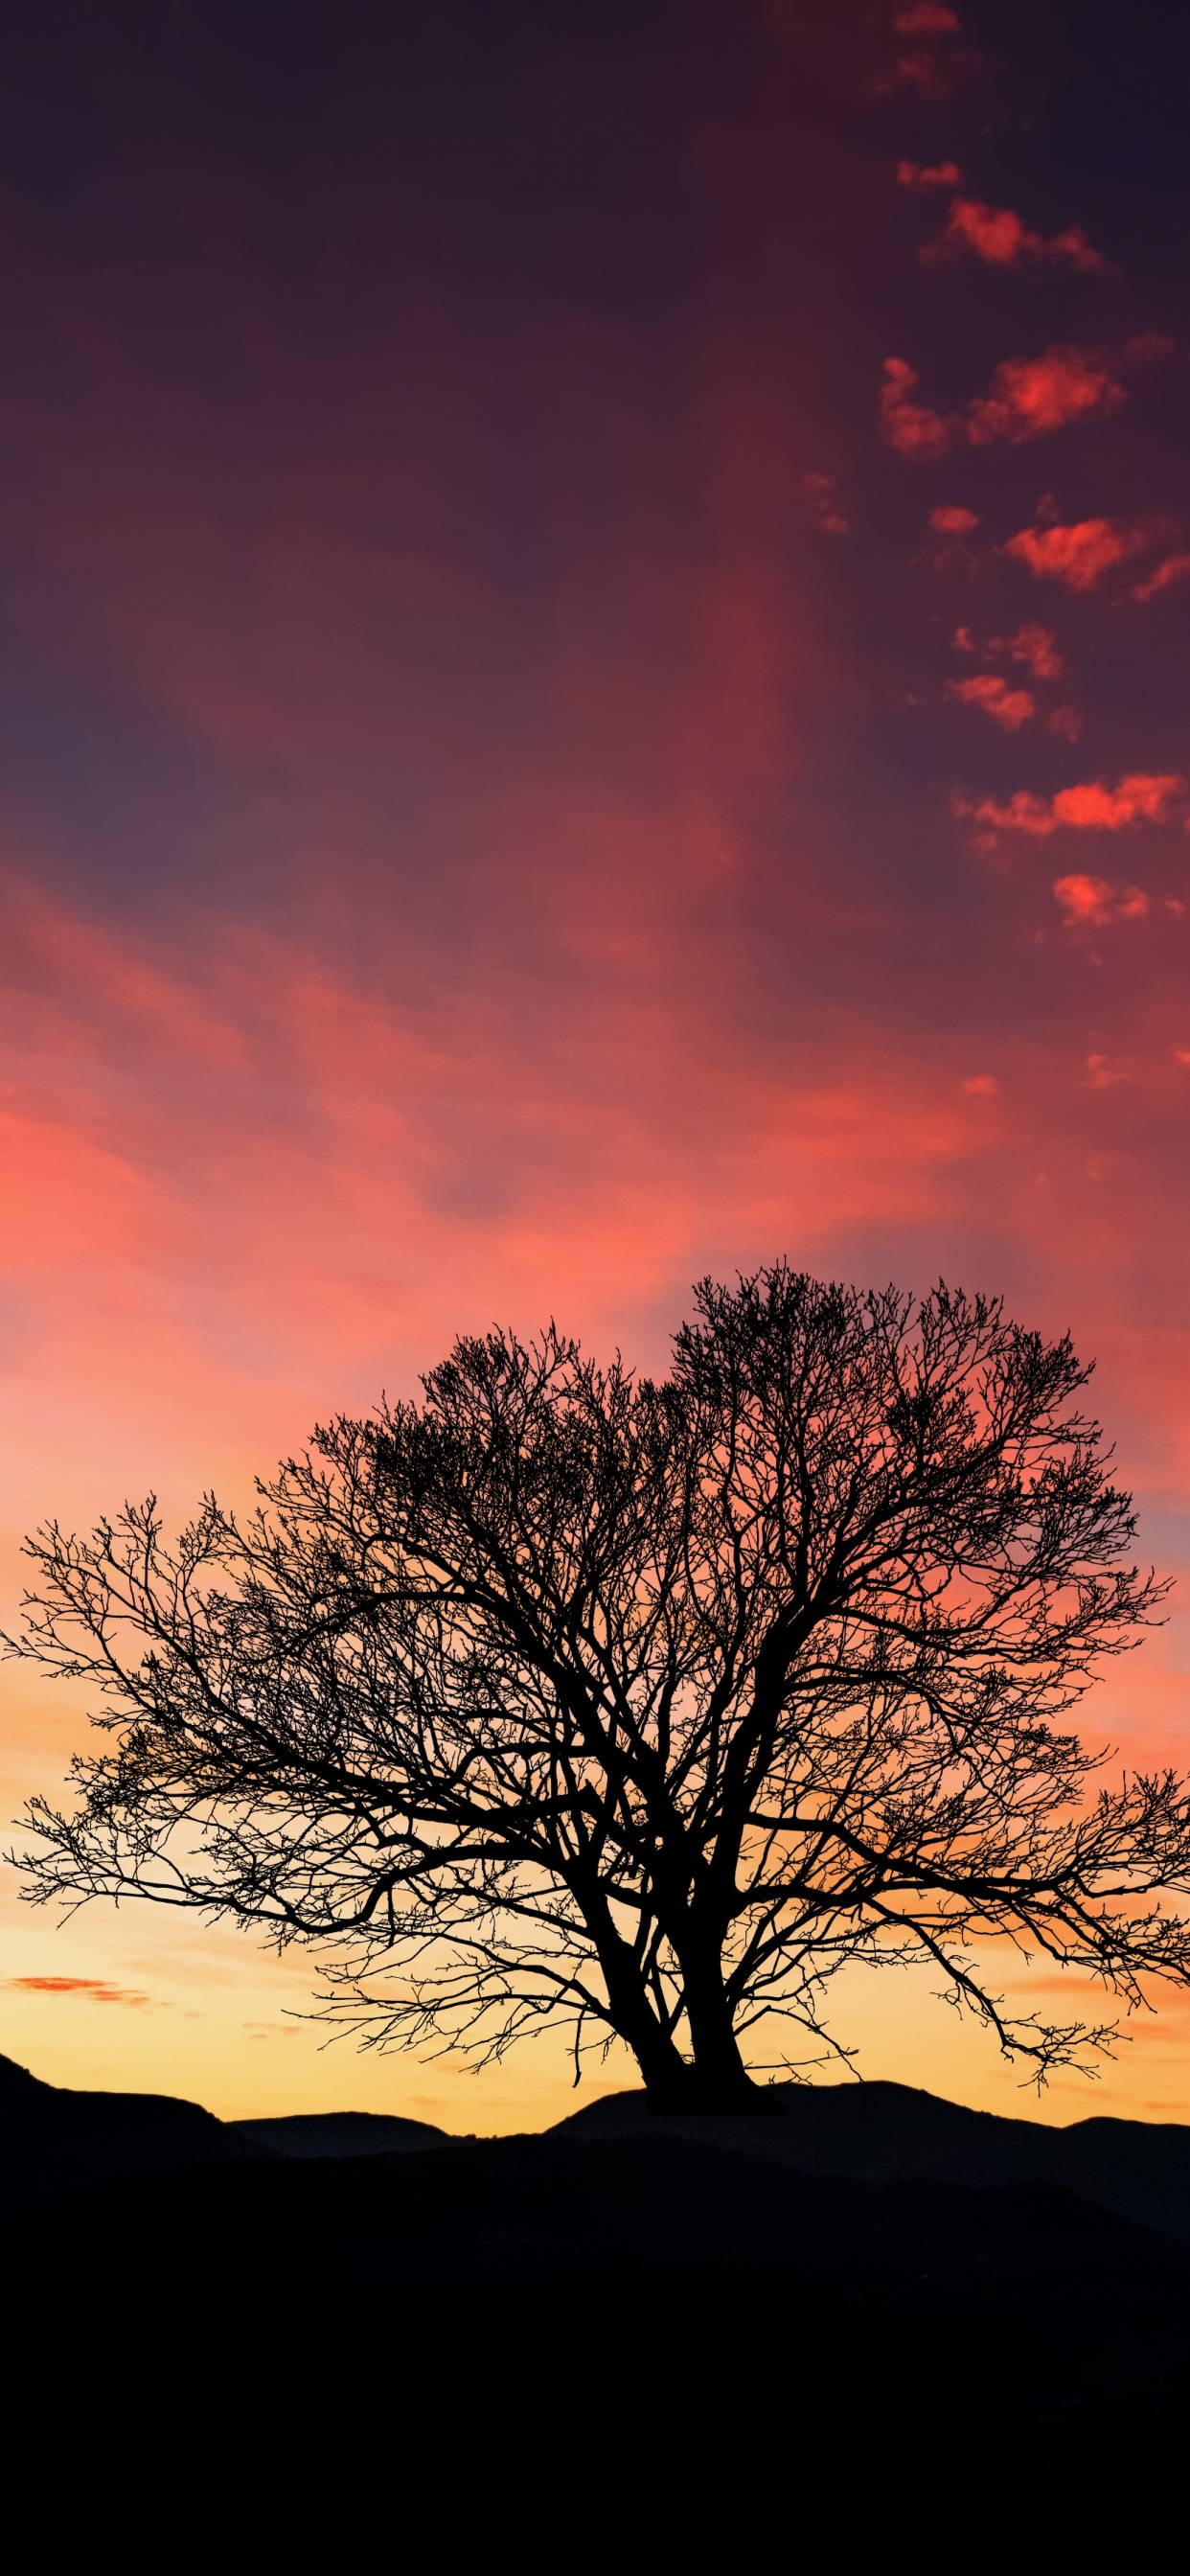 Silhouette of Bare Tree During Sunset. Wallpaper in 1242x2688 Resolution